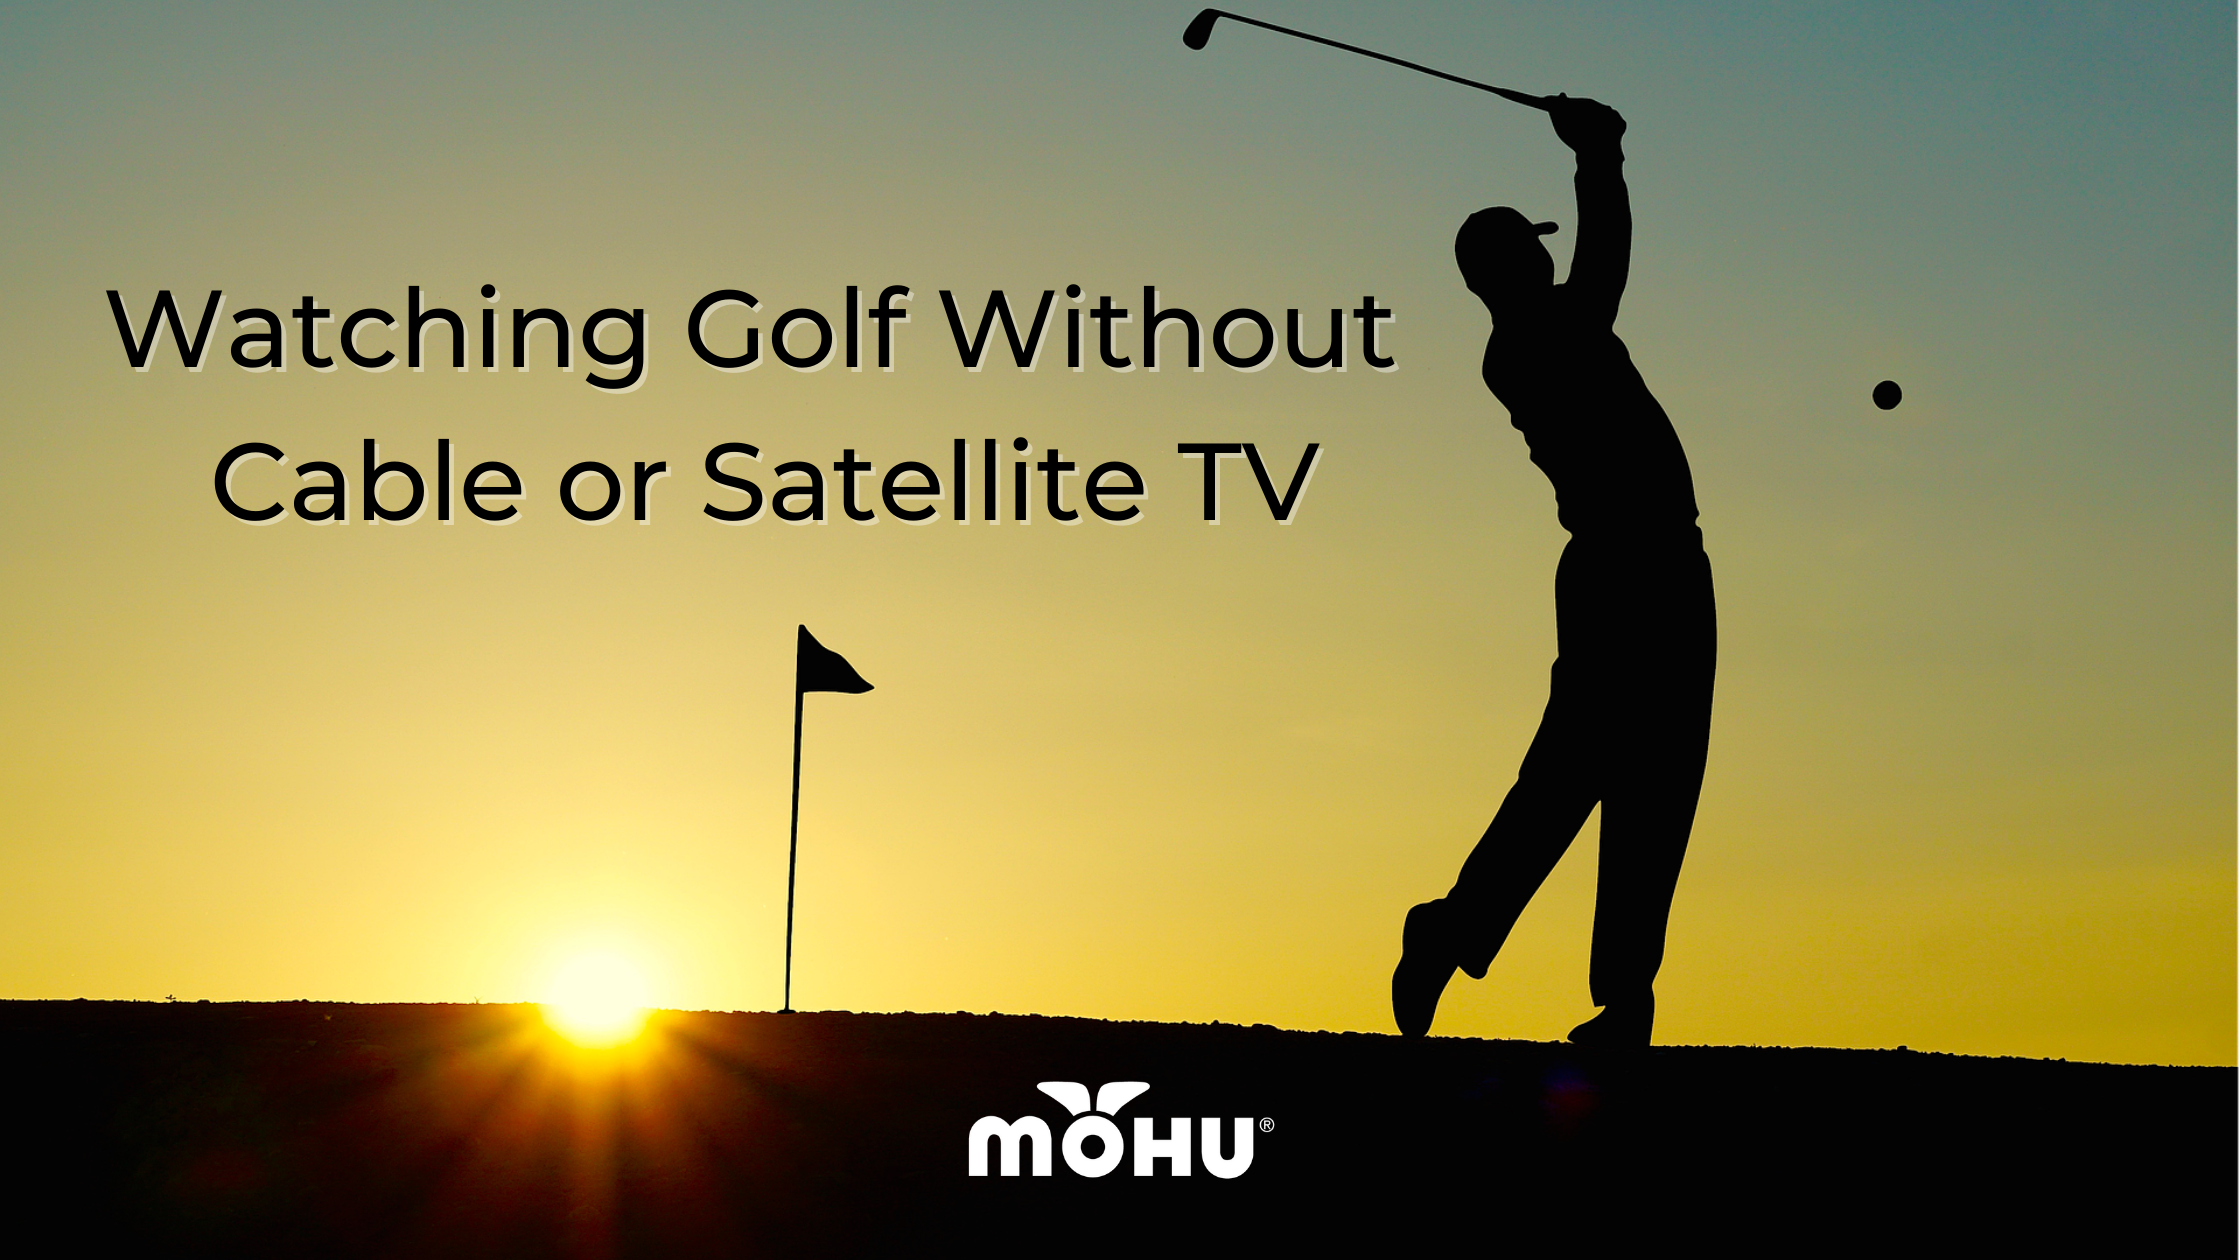 Man golfing at sunset, Watching Golf Without Cable or Satellite TV, Mohu logo